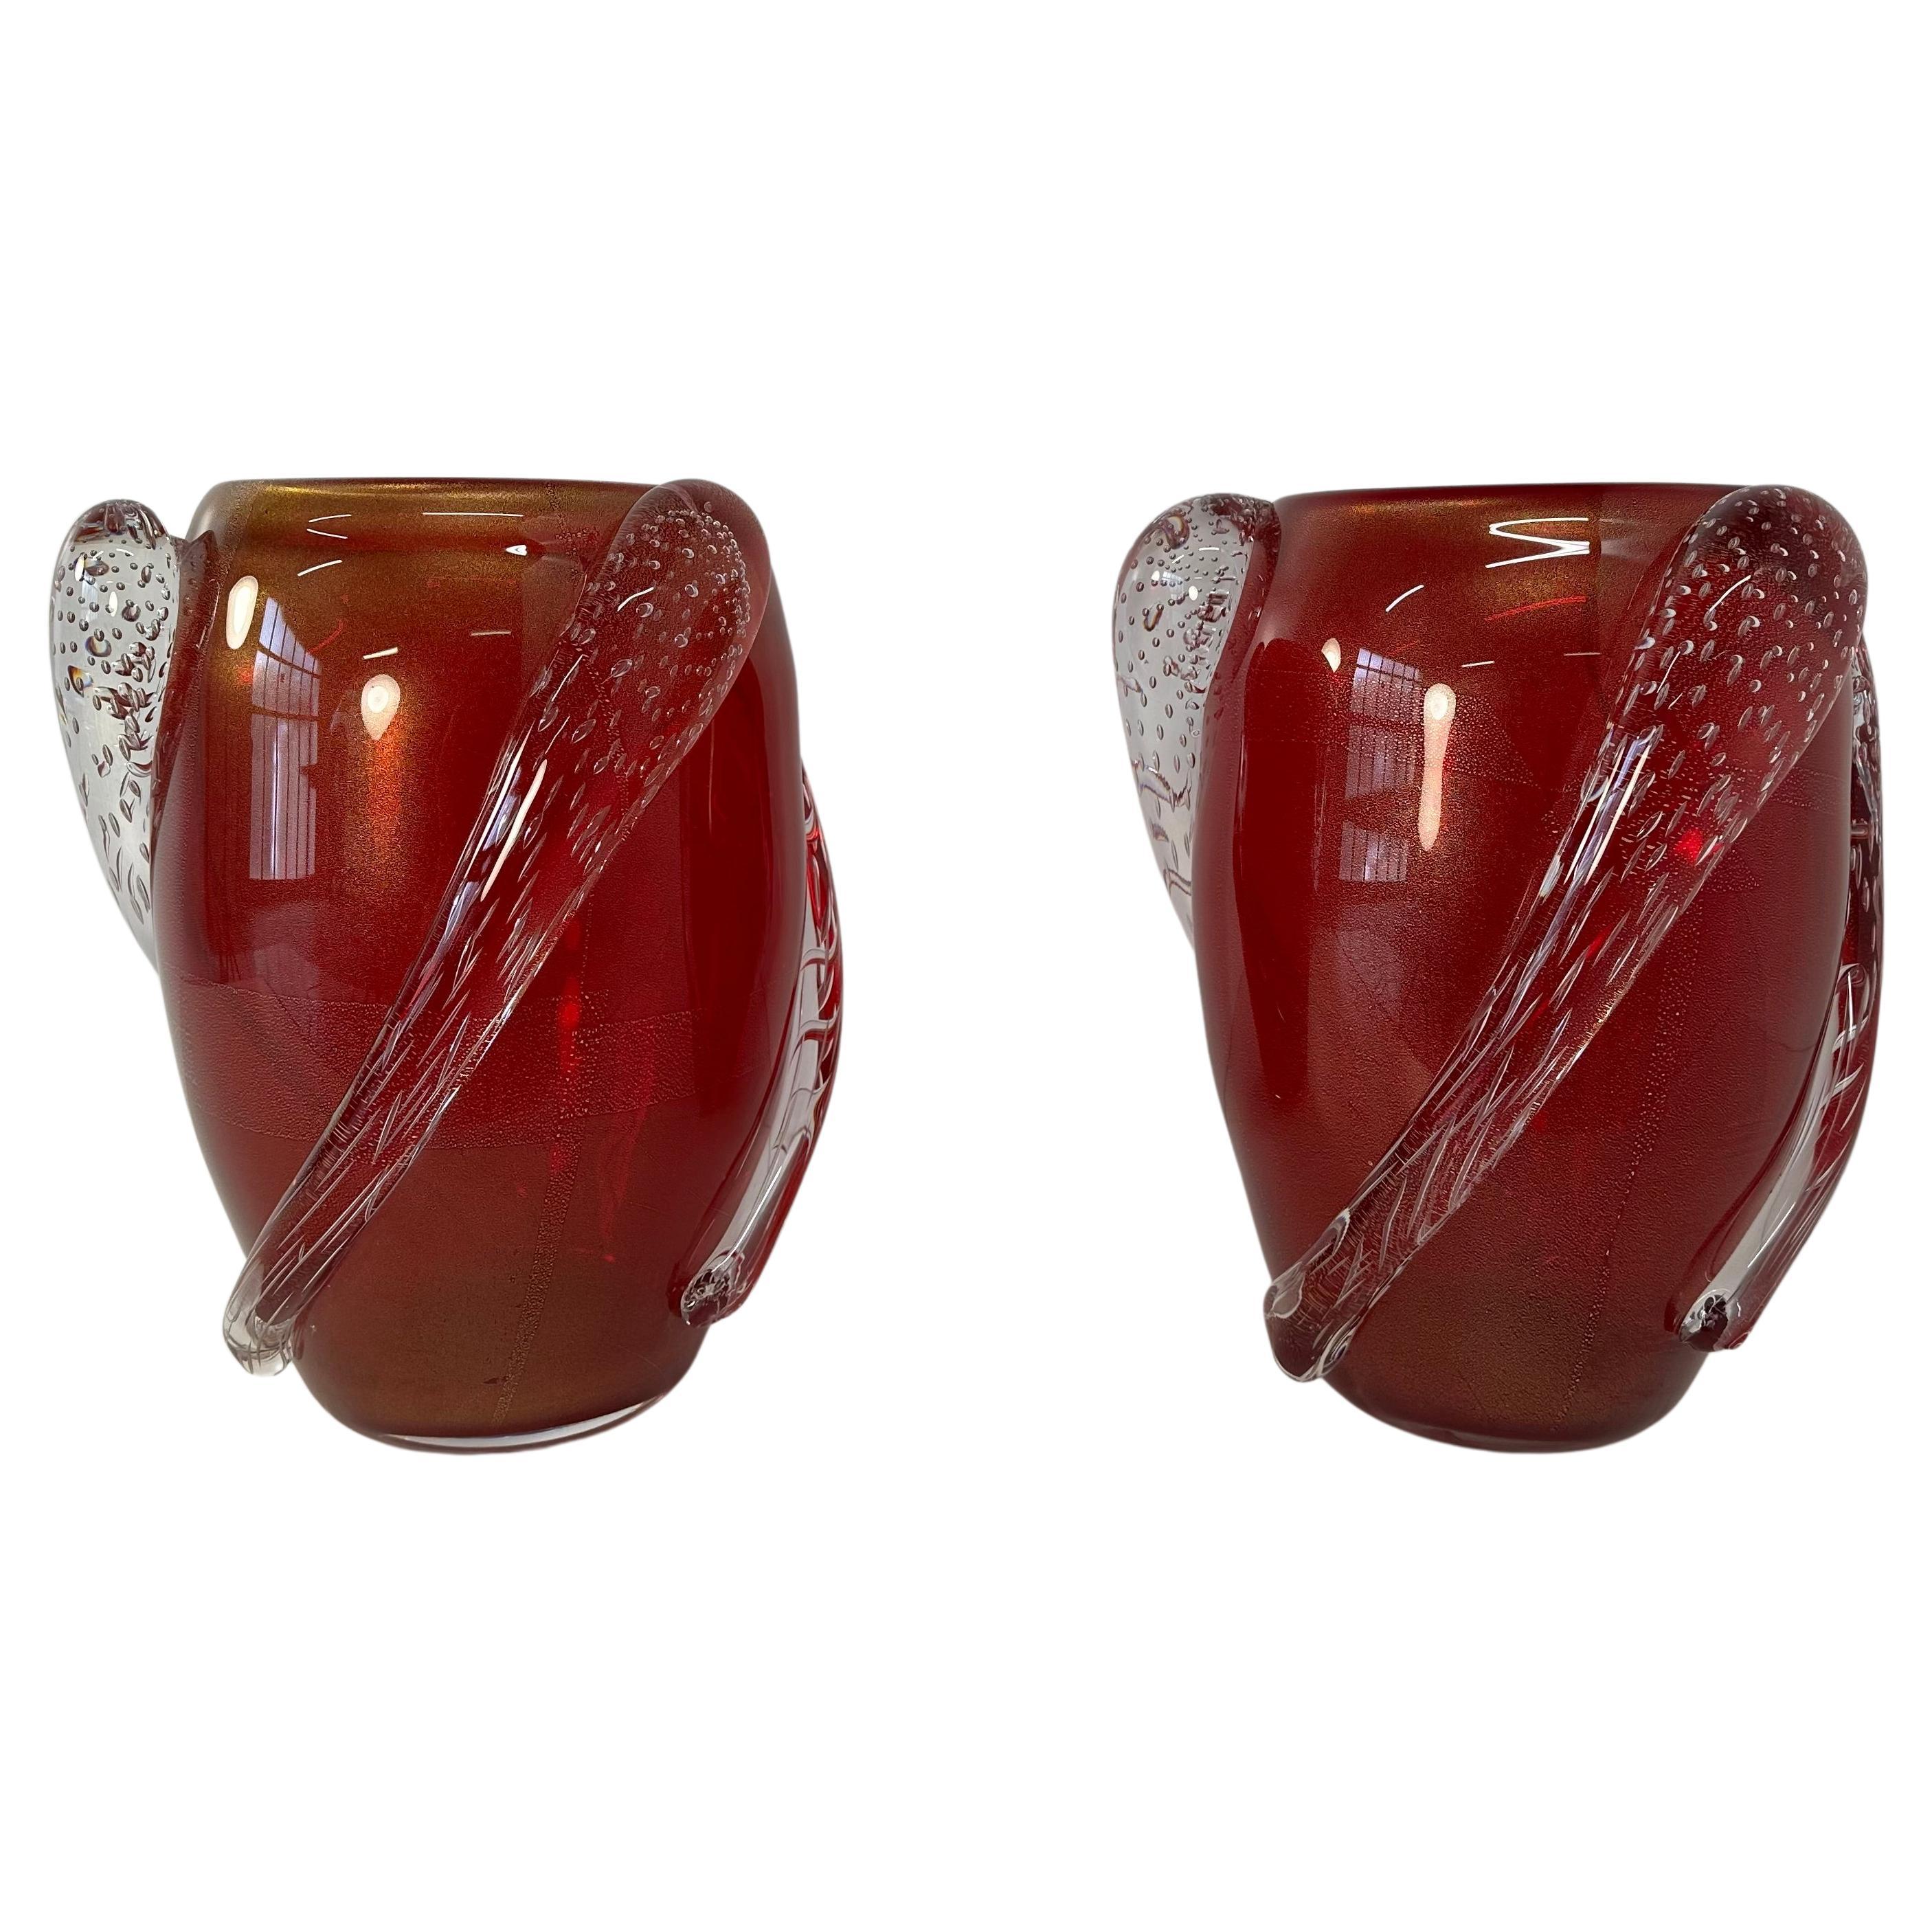 Italian Art Deco Cherry Red, Gold Leaf and Transparent Murano Glass Vases 